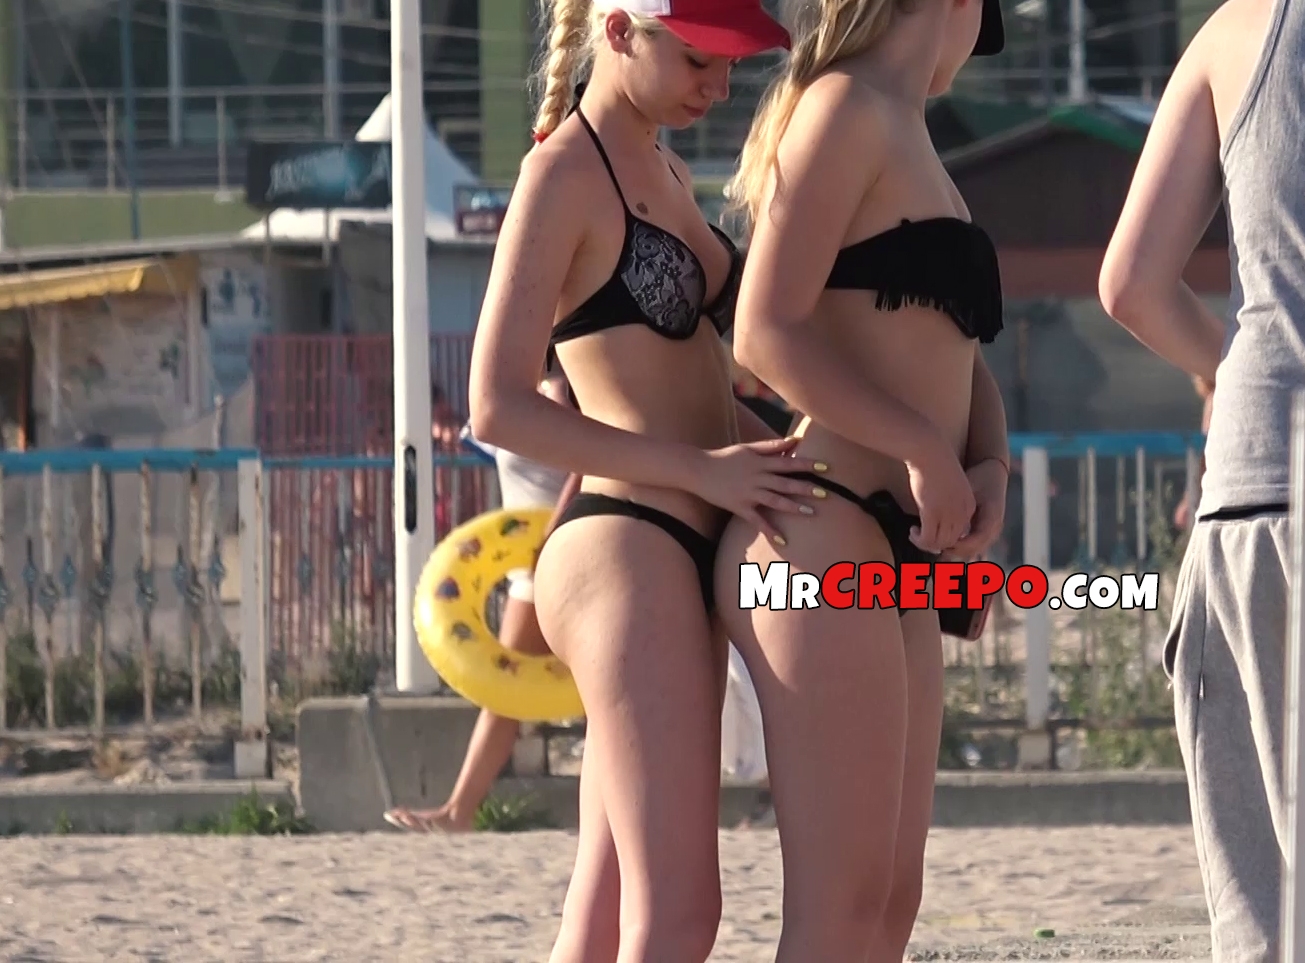 Spying on lesbian teens touching at the beach ~ Mr pic